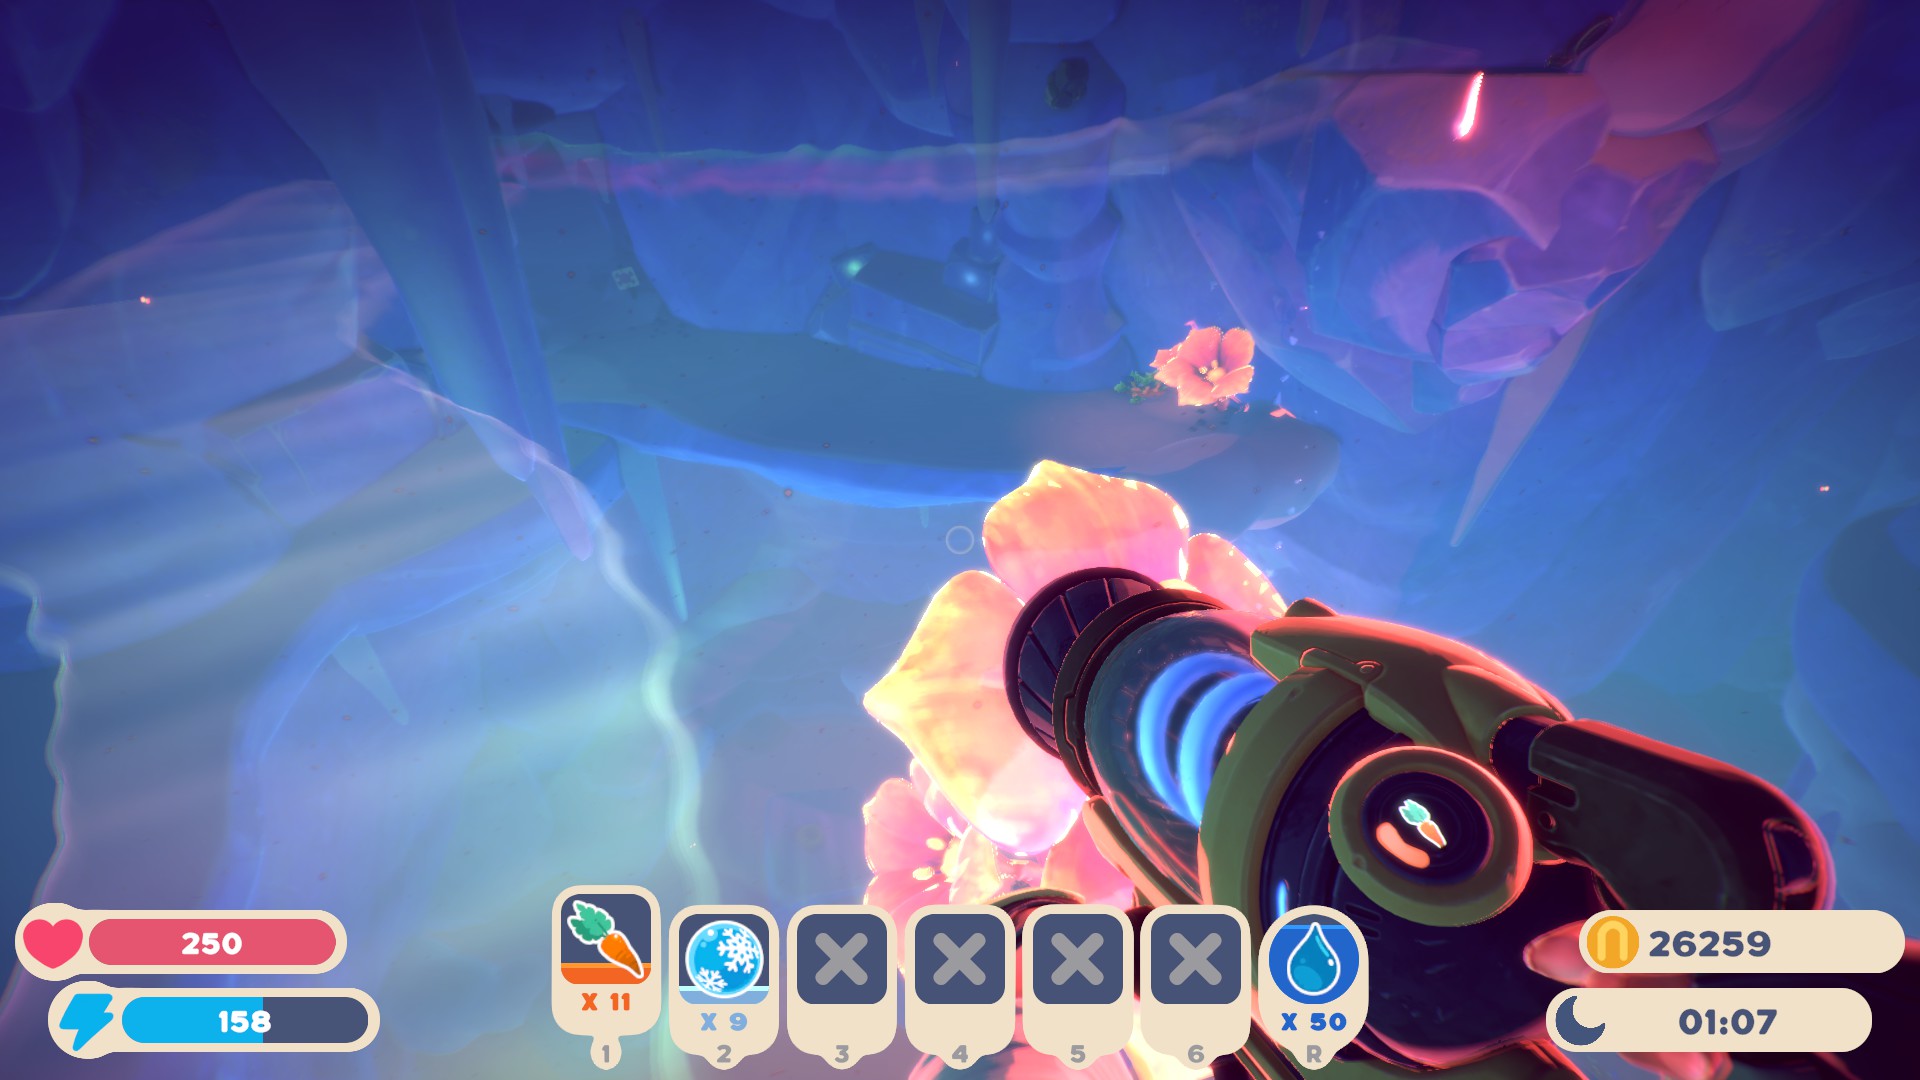 Slime Rancher 2 - Capsule Locations for Powderfall Bluffs - Pods 7 - 12 (Underground) - 6D33769